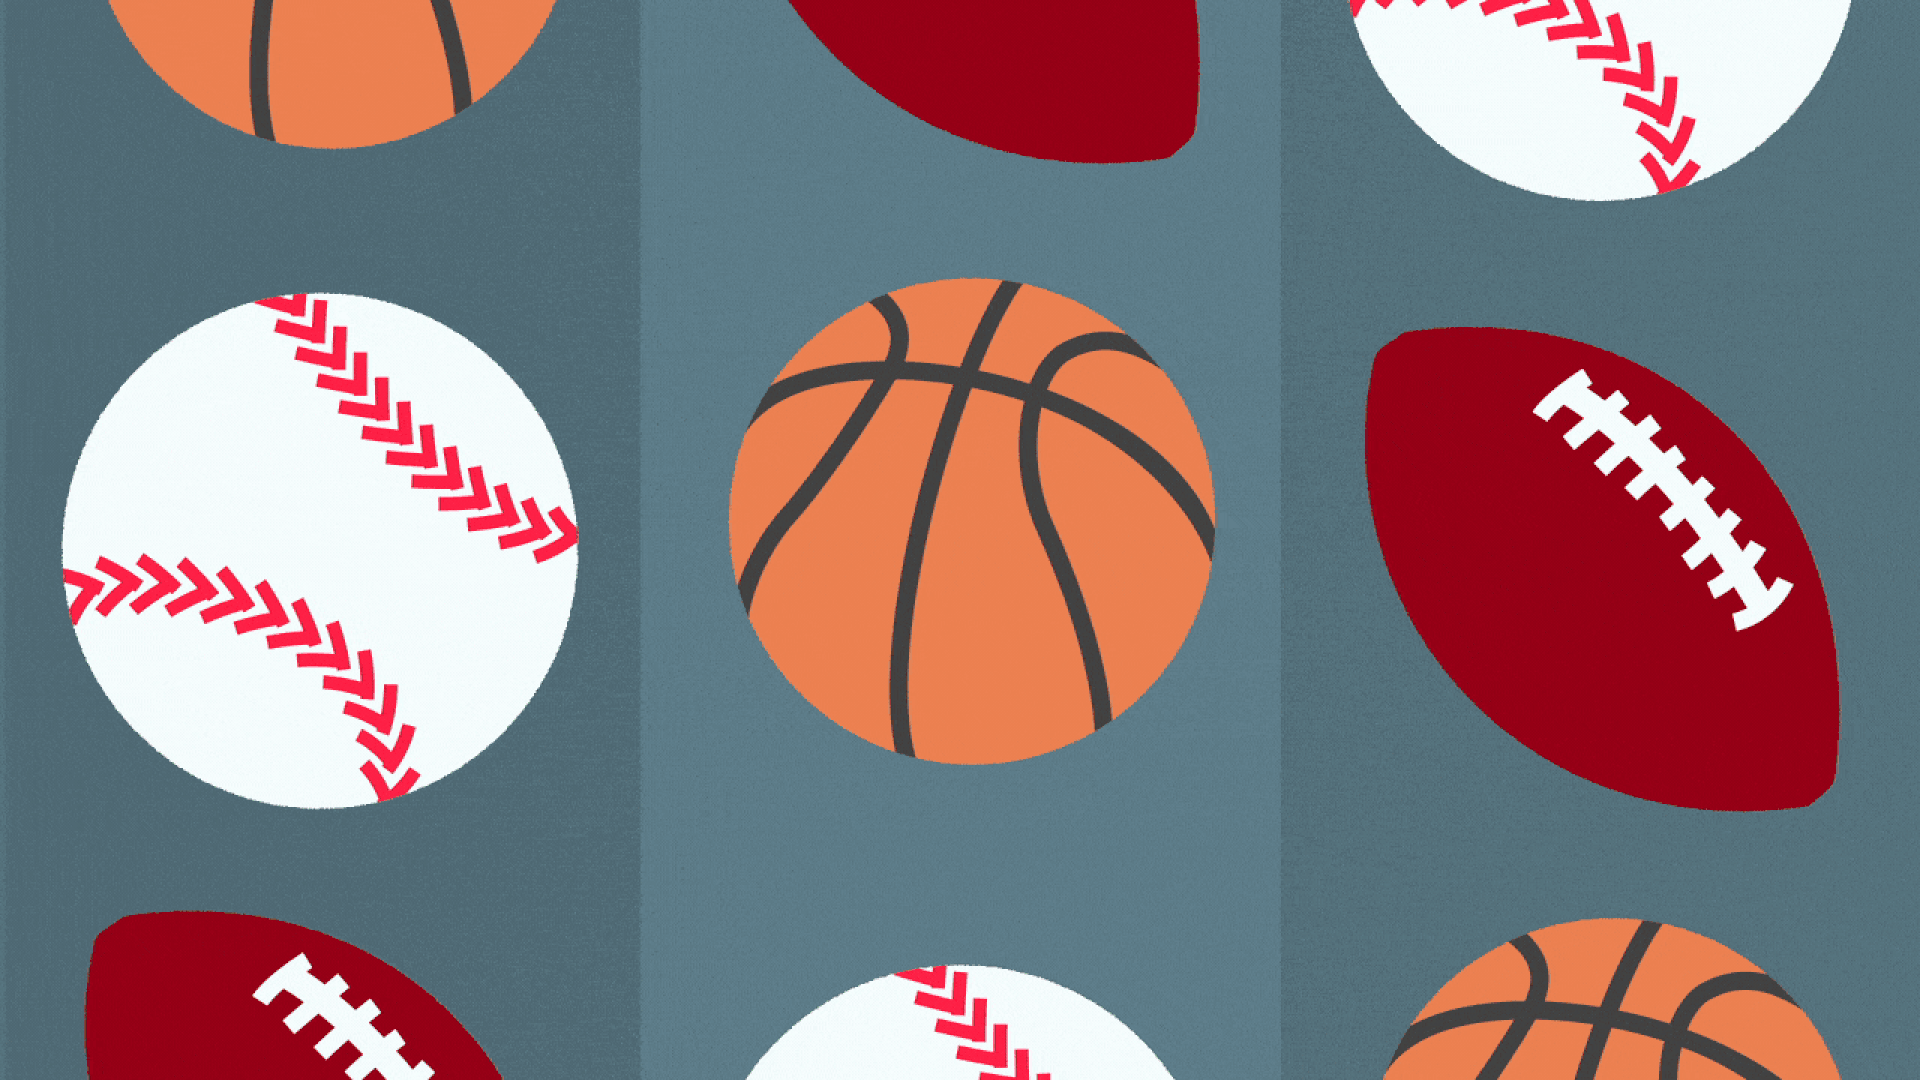 Illustration of a slot machine featuring a basketball, baseball and football, ending in three dollar signs